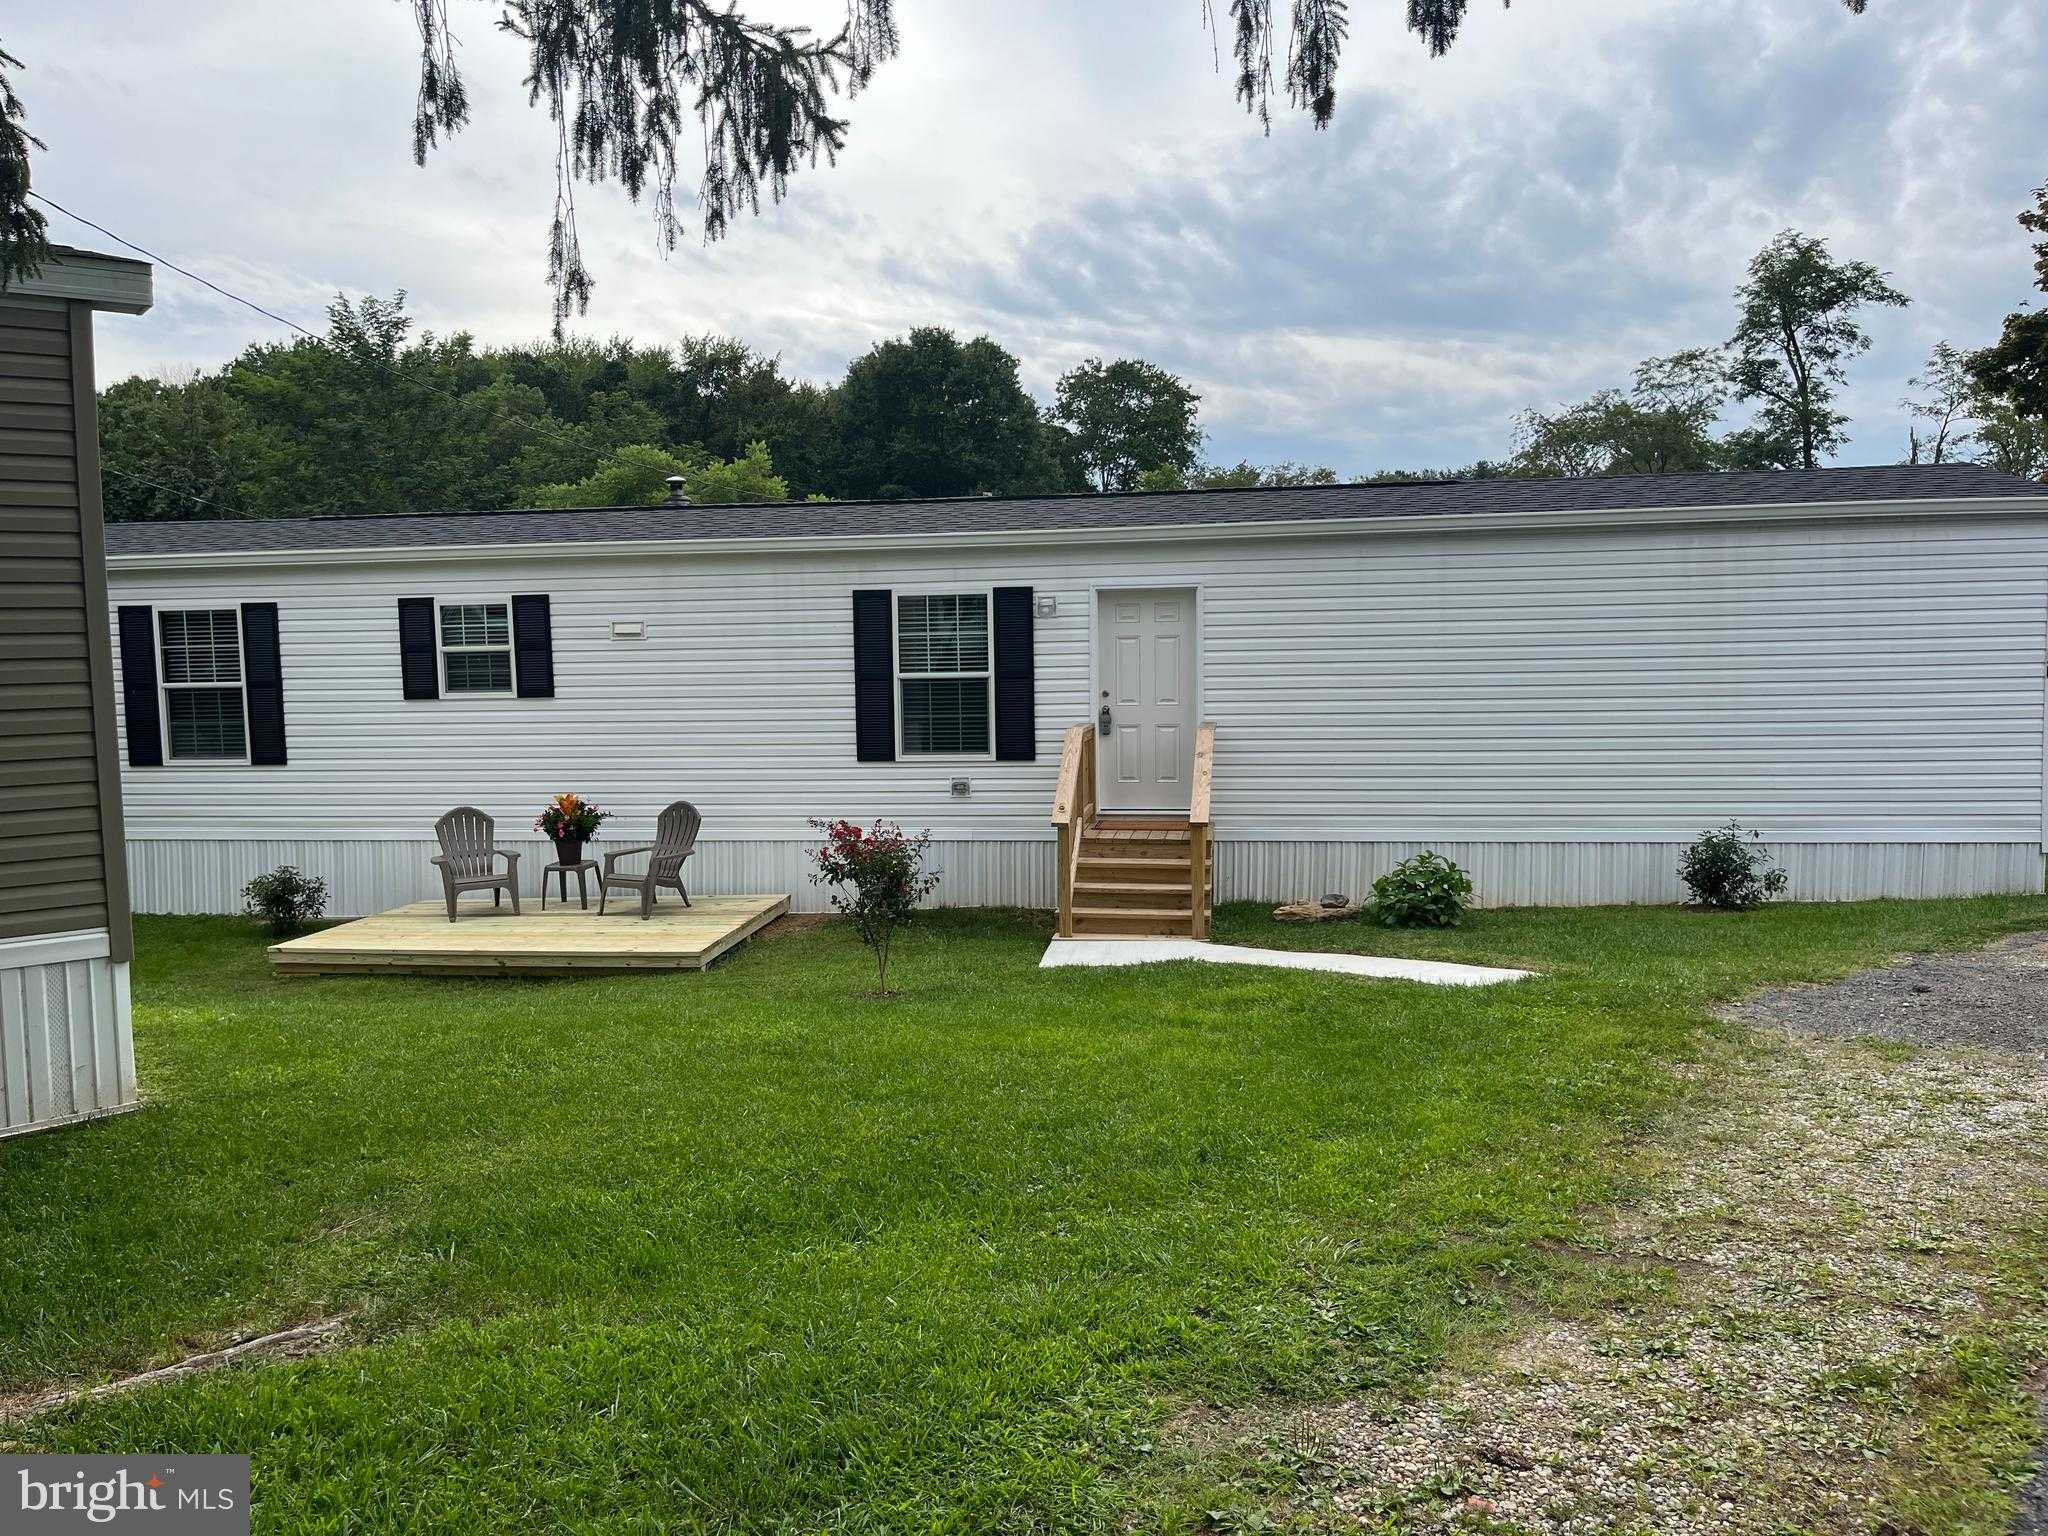 Photo 1 of 31 of 2525 Lot 20 BALTIMORE BOULEVARD mobile home